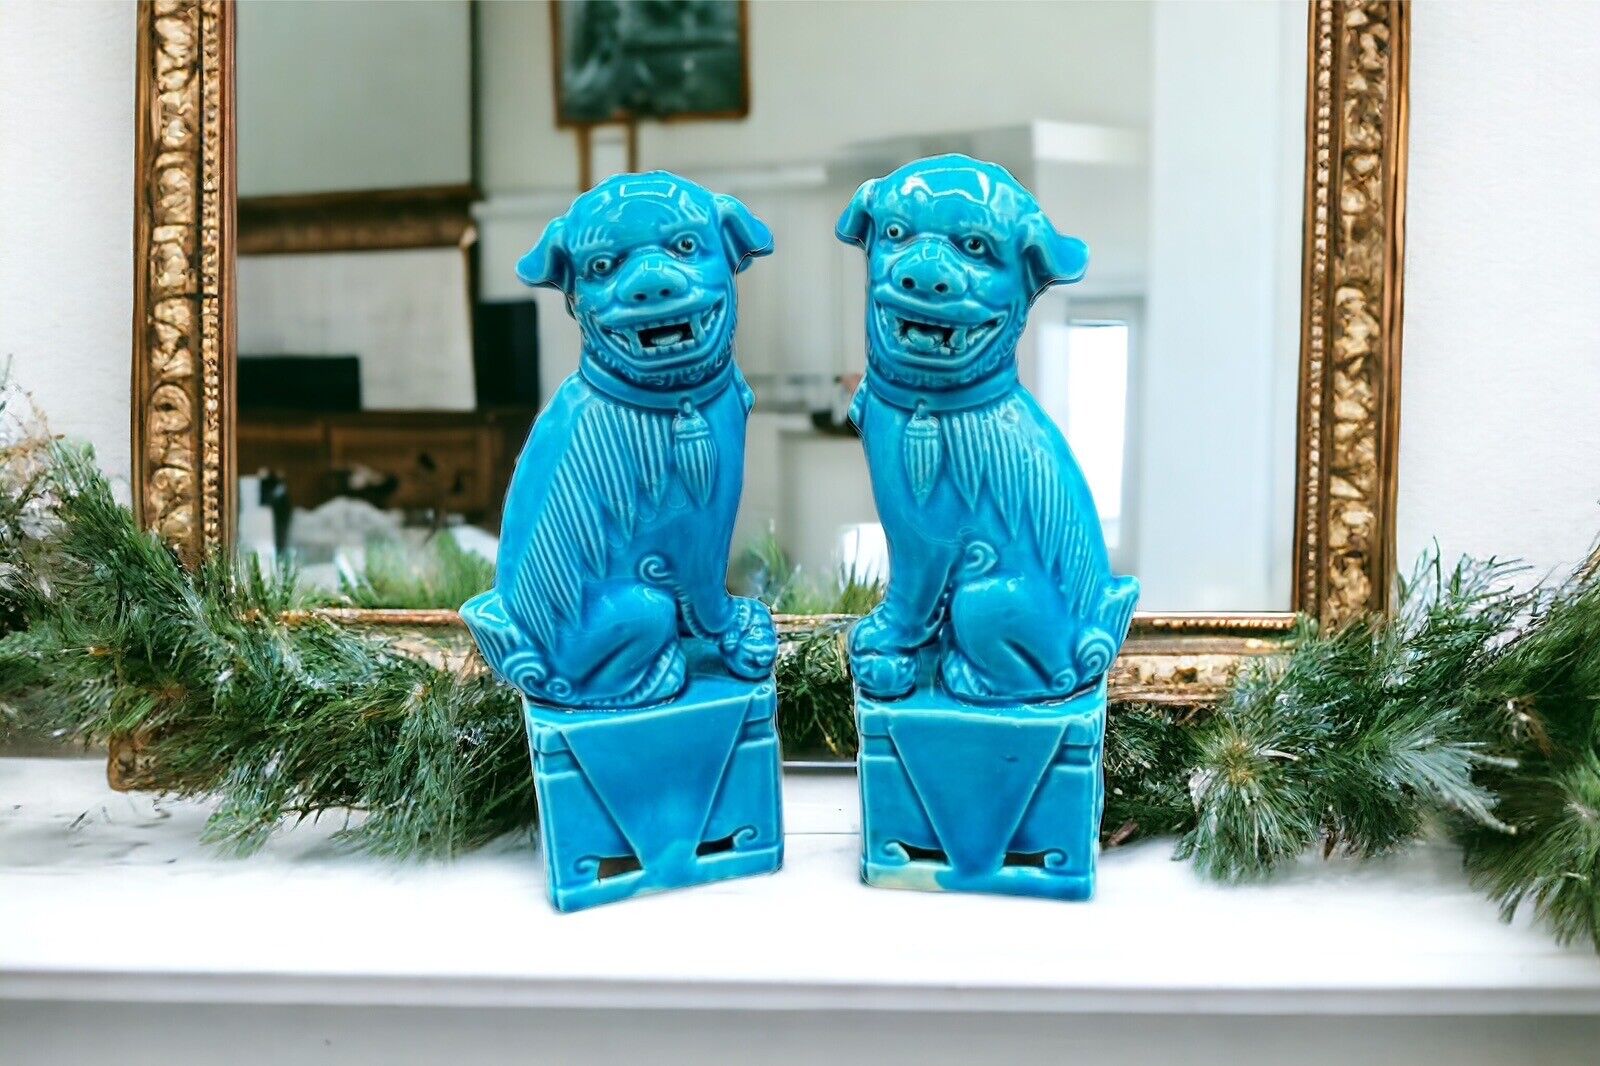 Small Pair of Vintage Turquoise Glazed Ceramic Foo Dogs - China - Circa 1980's